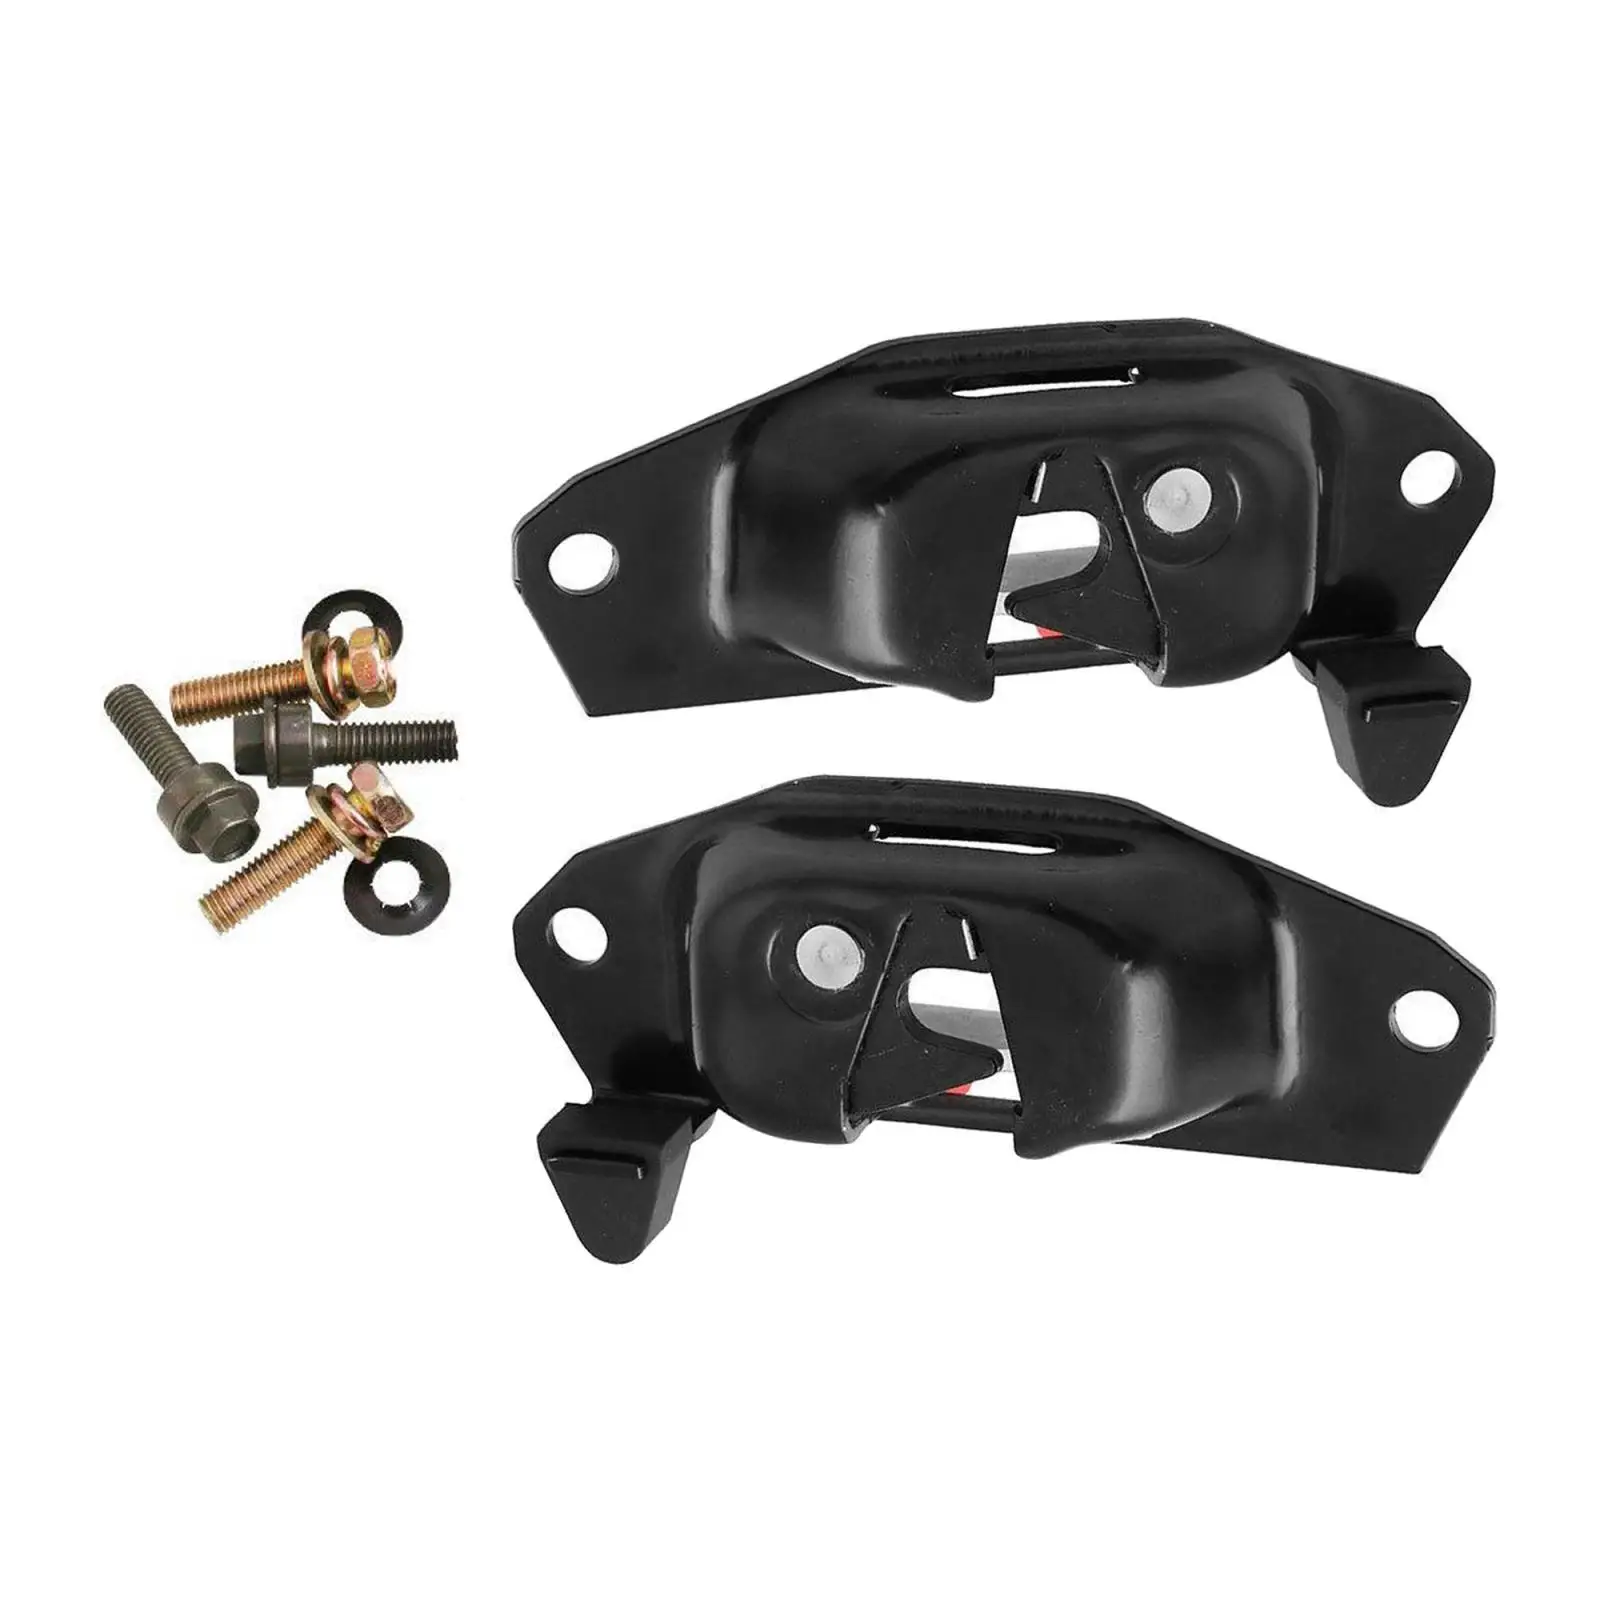  Pair Tailgate Latch Lever with  Bolt, Fit for 1999-2007  Silverad Replace # 15921948 15921949, Rear Gate Lock Latch